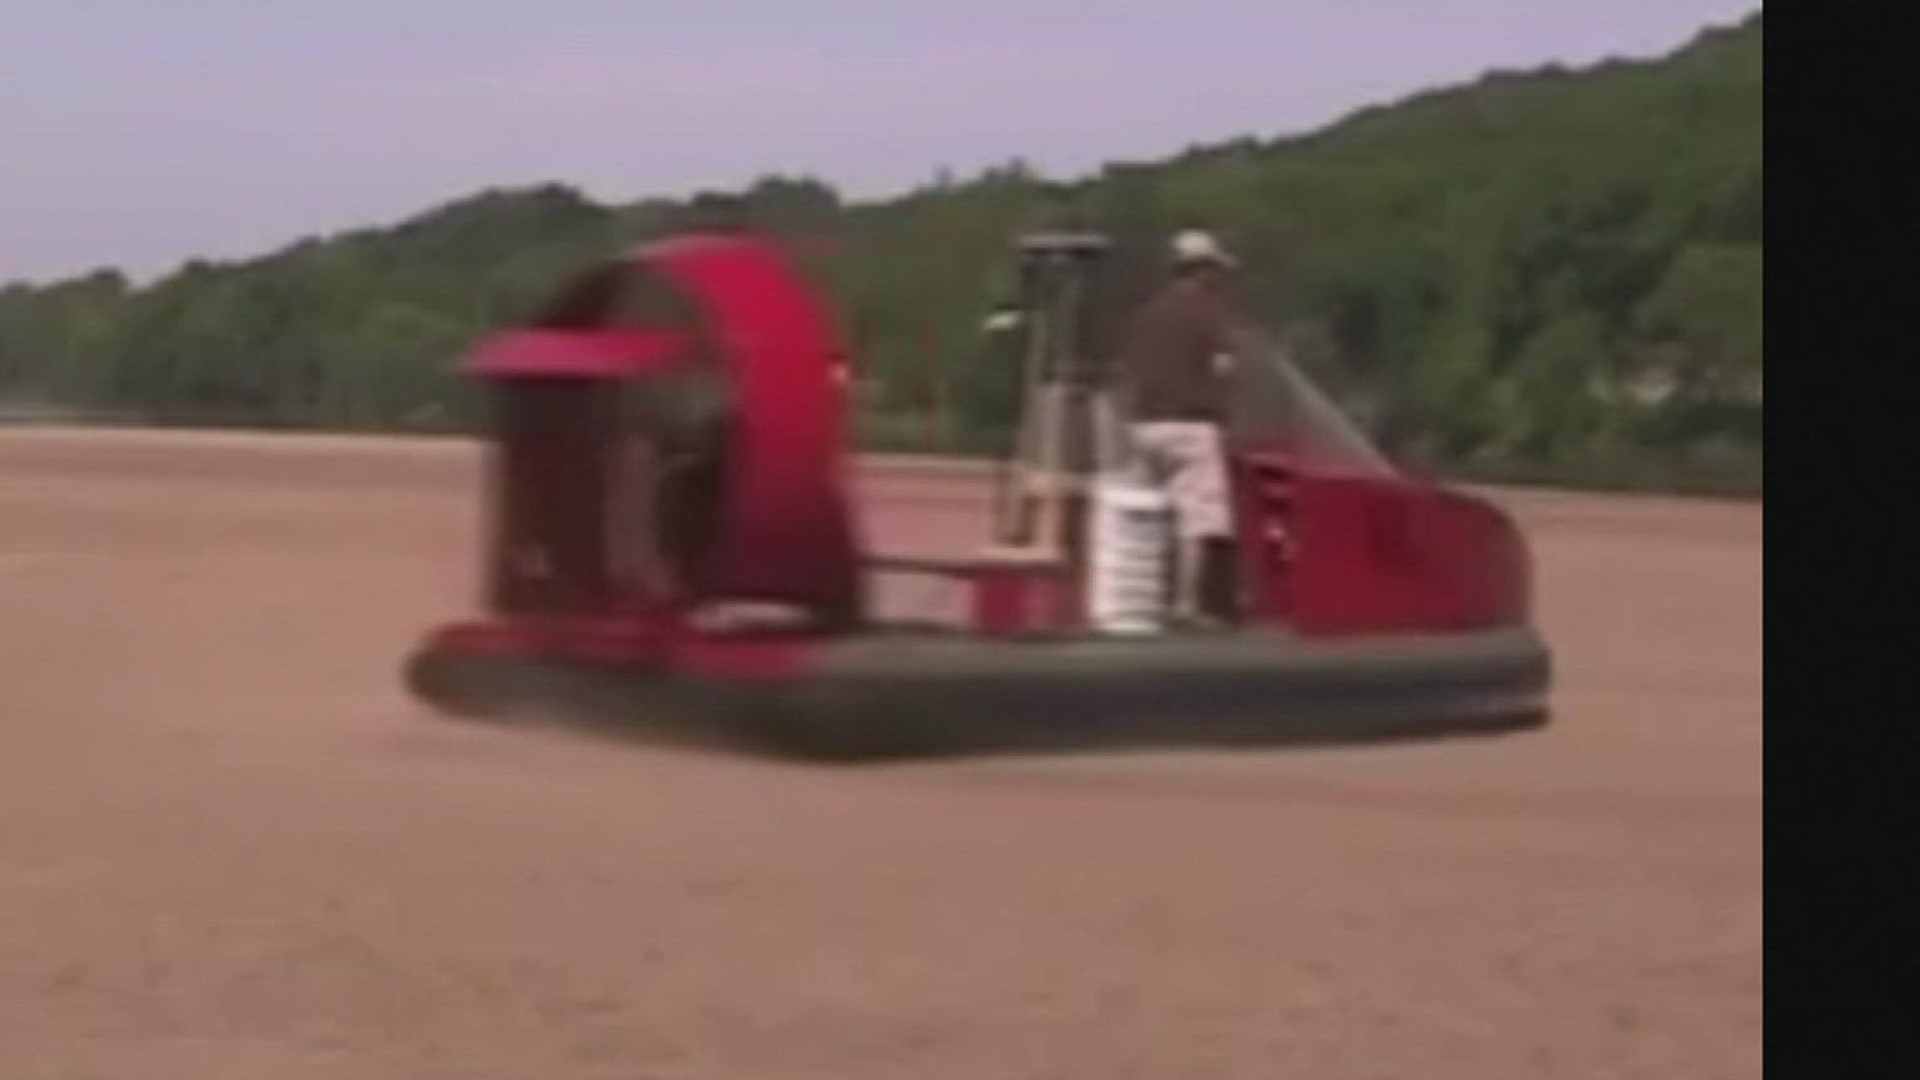 According to Kleberg County Sheriff Richard Kirkpatrick, new hovercraft technology is capable of surveillance that can get in and out of the narrow Los Olmos Creek.